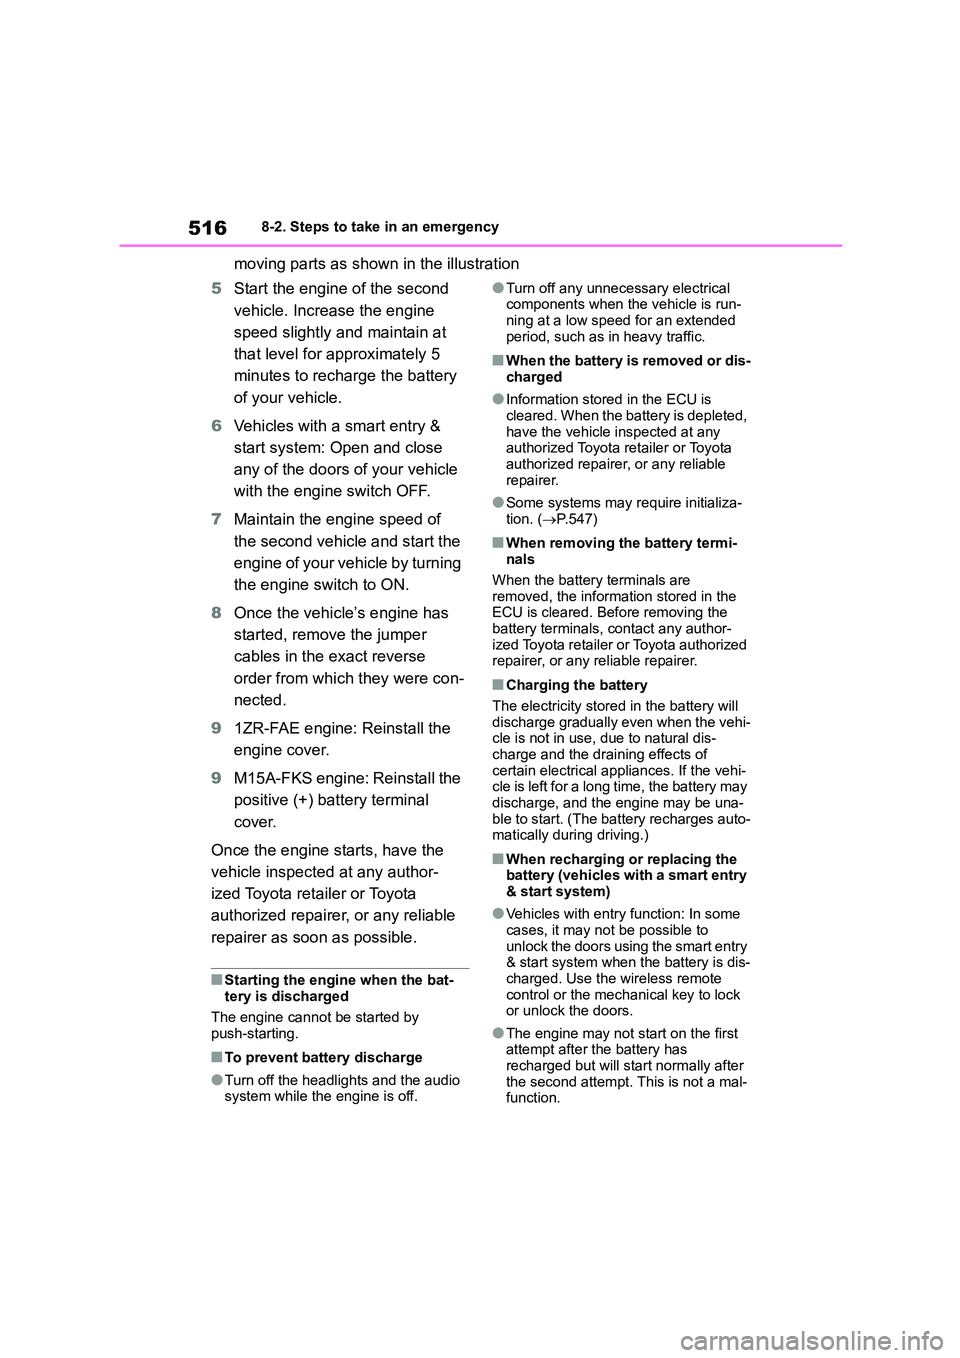 TOYOTA COROLLA 2022  Owners Manual (in English) 5168-2. Steps to take in an emergency
moving parts as shown in the illustration 
5 Start the engine of the second  
vehicle. Increase the engine 
speed slightly and maintain at 
that level for approxi